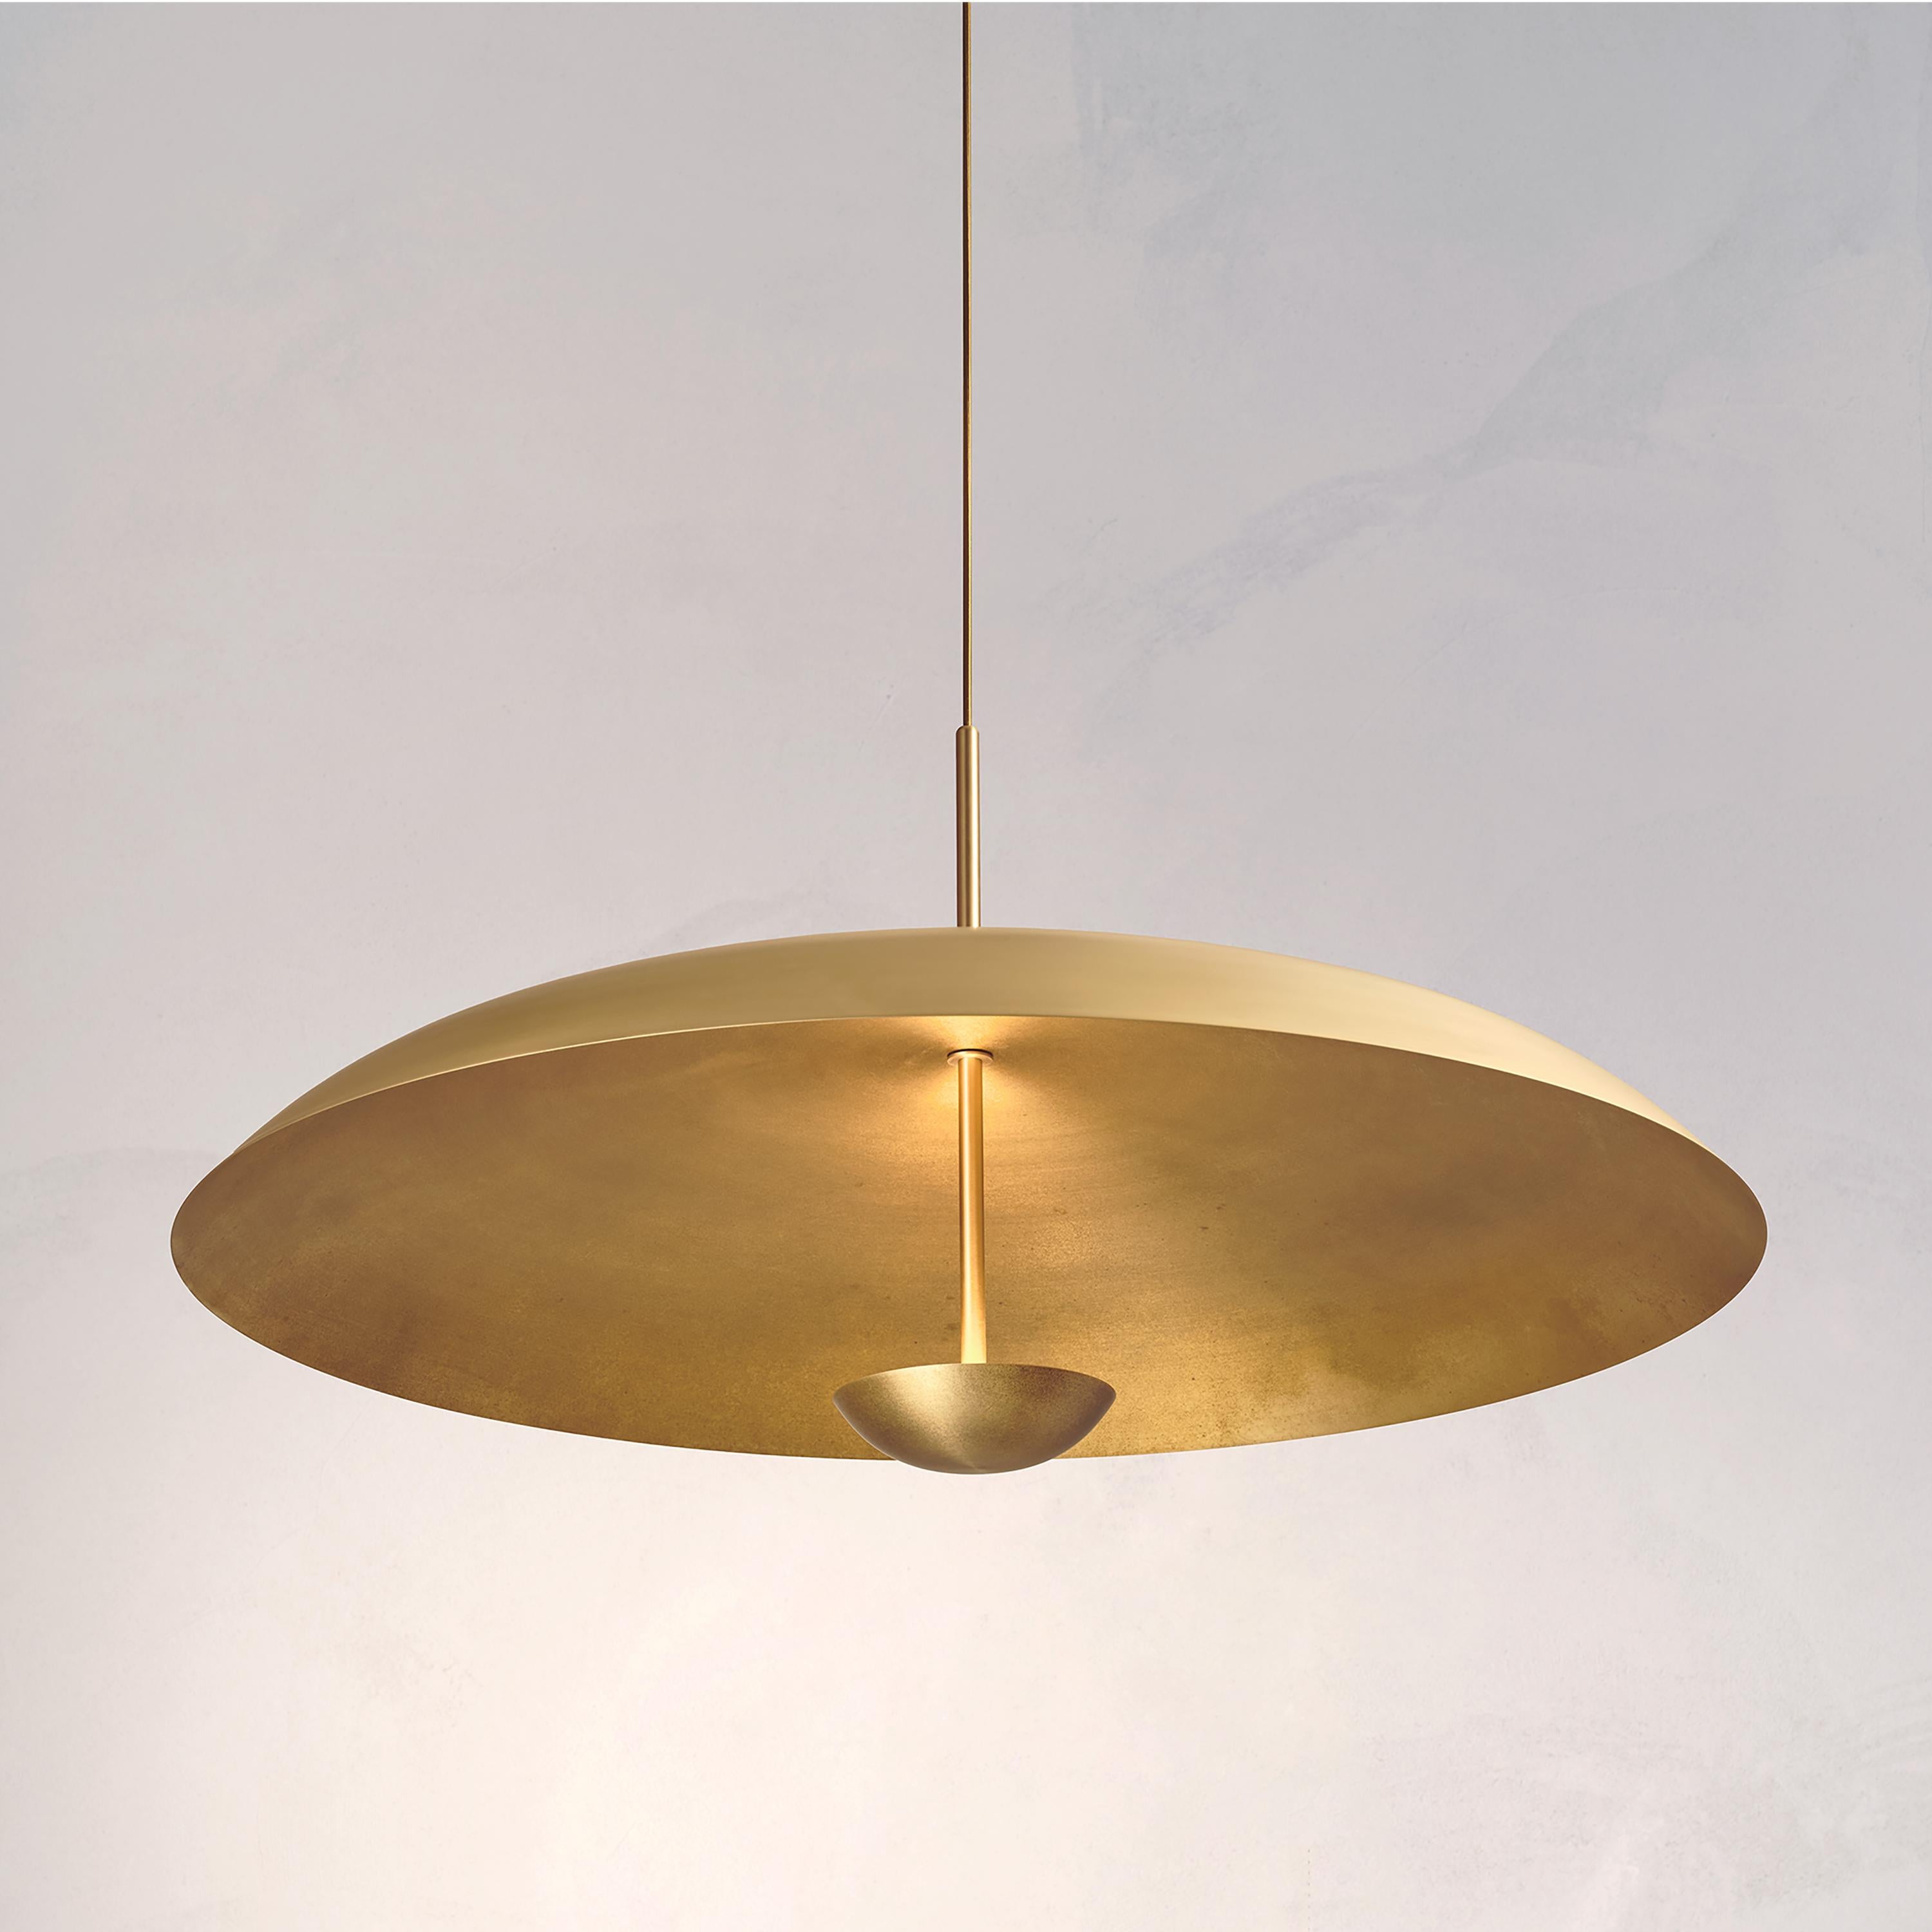 Two finely hand-spun brass plates make up this pendant light, finished in a mixed patina to create this unique appearance. The light is projected into the shade and reflects out, illuminating without creating a glare.
 
This light fixture is